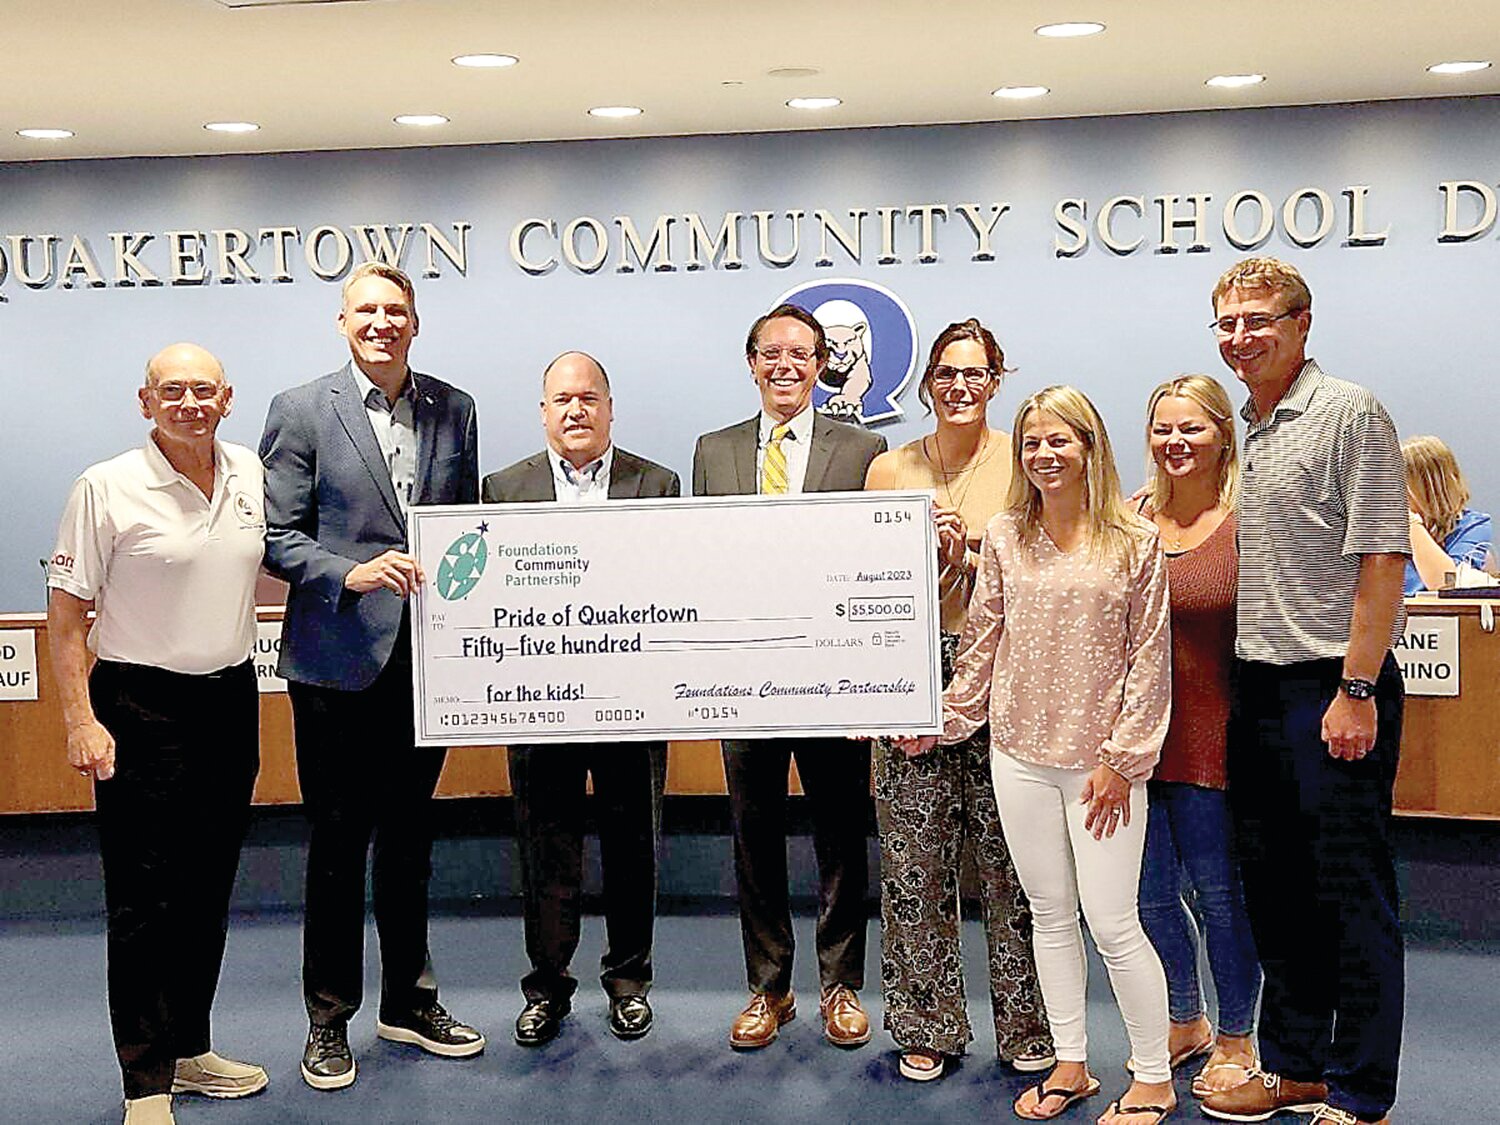 Presenting a grant to Pride of Quakertown are Tobi Bruhn, CEO of Foundations Community Partnerships, second from left, along with Board President Glenn Iosue and Dr. Matthew Friedman, superintendent of the Quakertown Community School District. Accepting the award, from left, are Dan Ross, Leigh Ann Staudenmeier, Jen Reich, Alexis Murphy and Steve Reich.